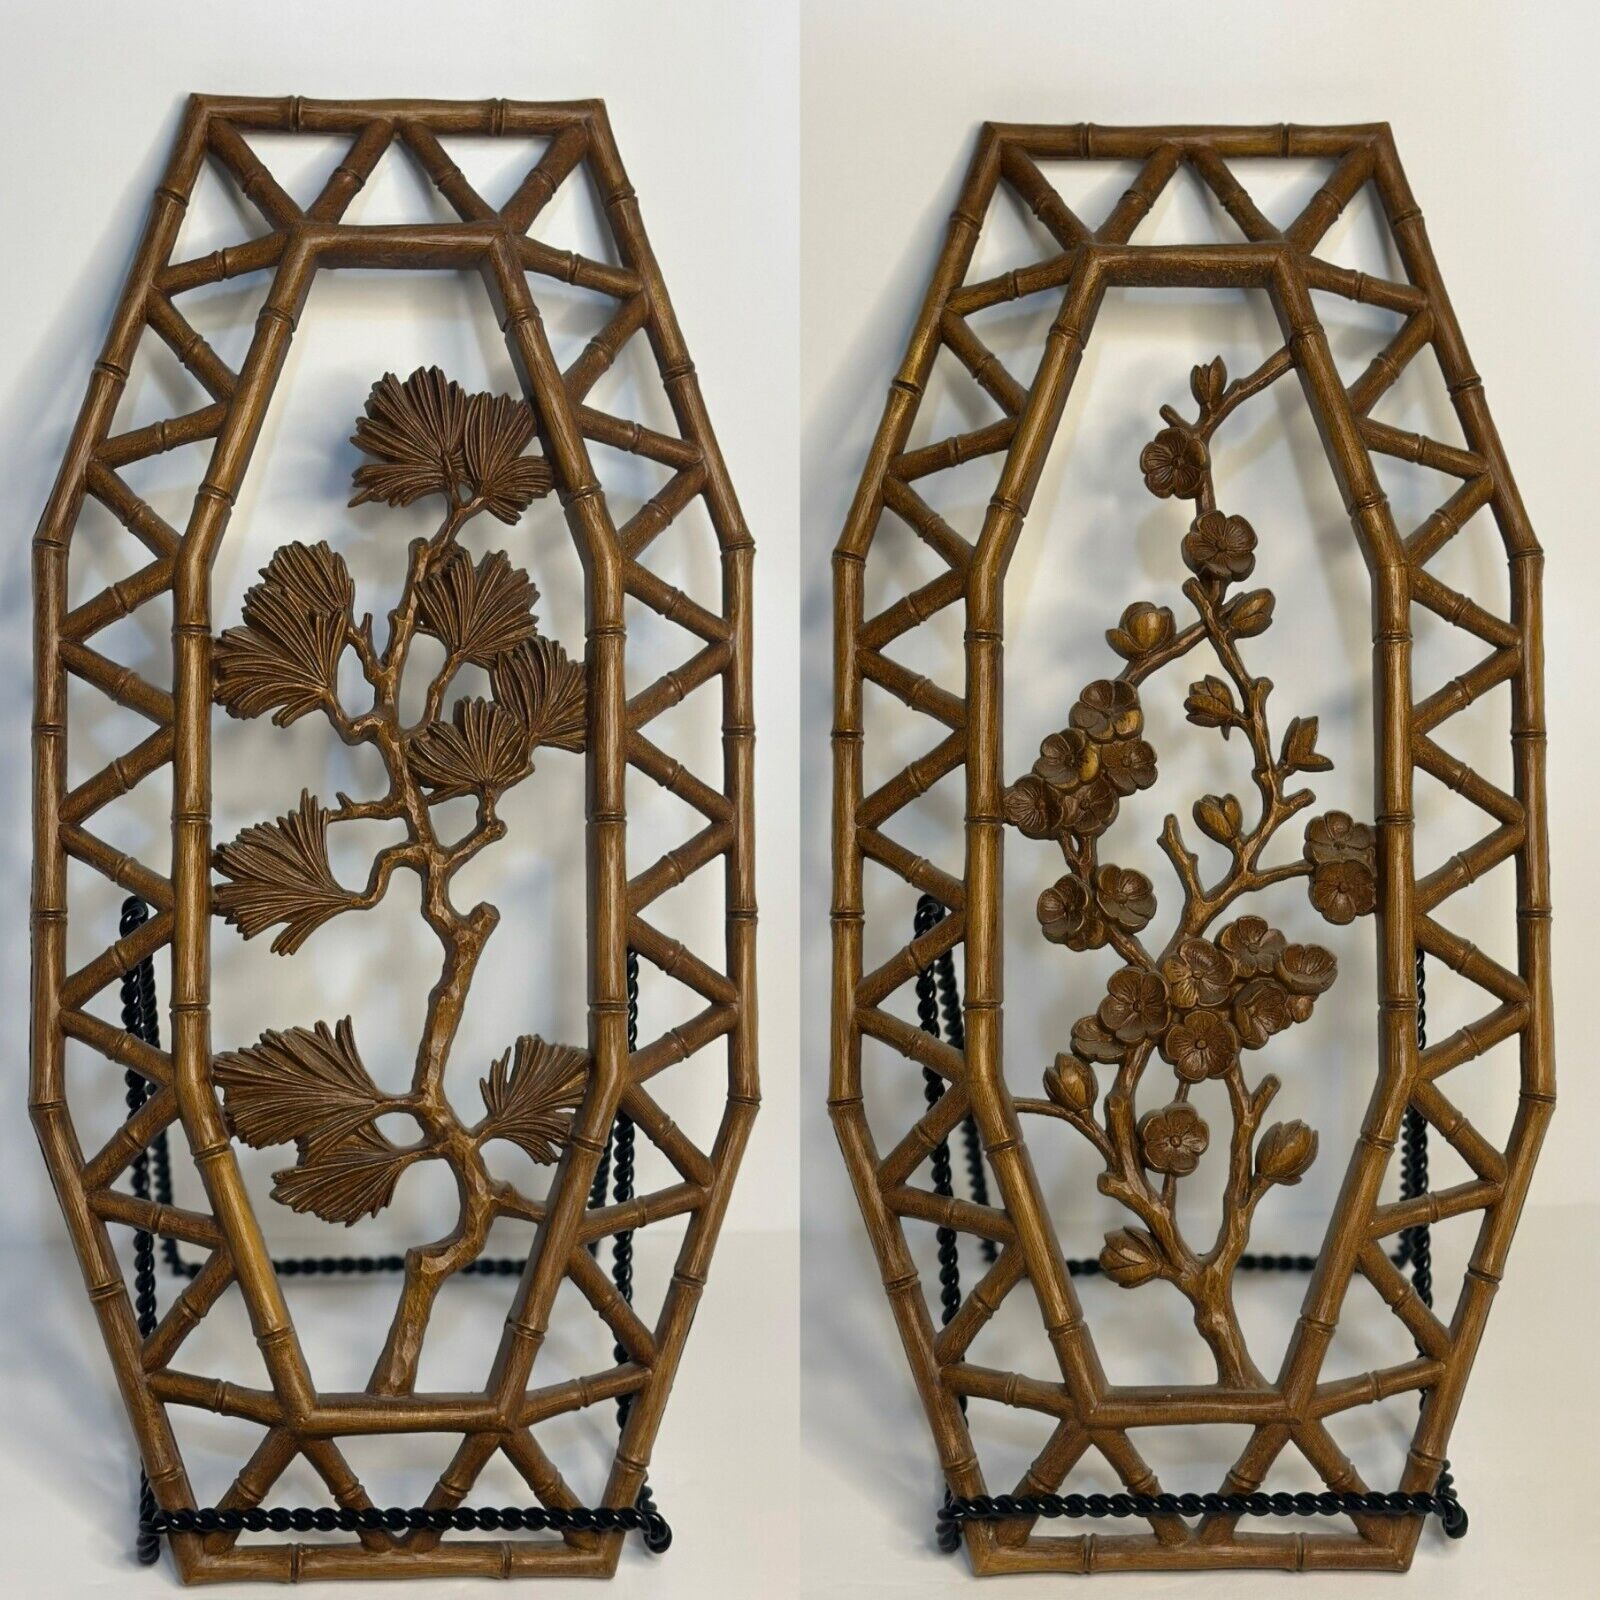 Vintage 1977 HOMCO Wall Decor Plaques Faux Bamboo Floral Mid Century Syroco